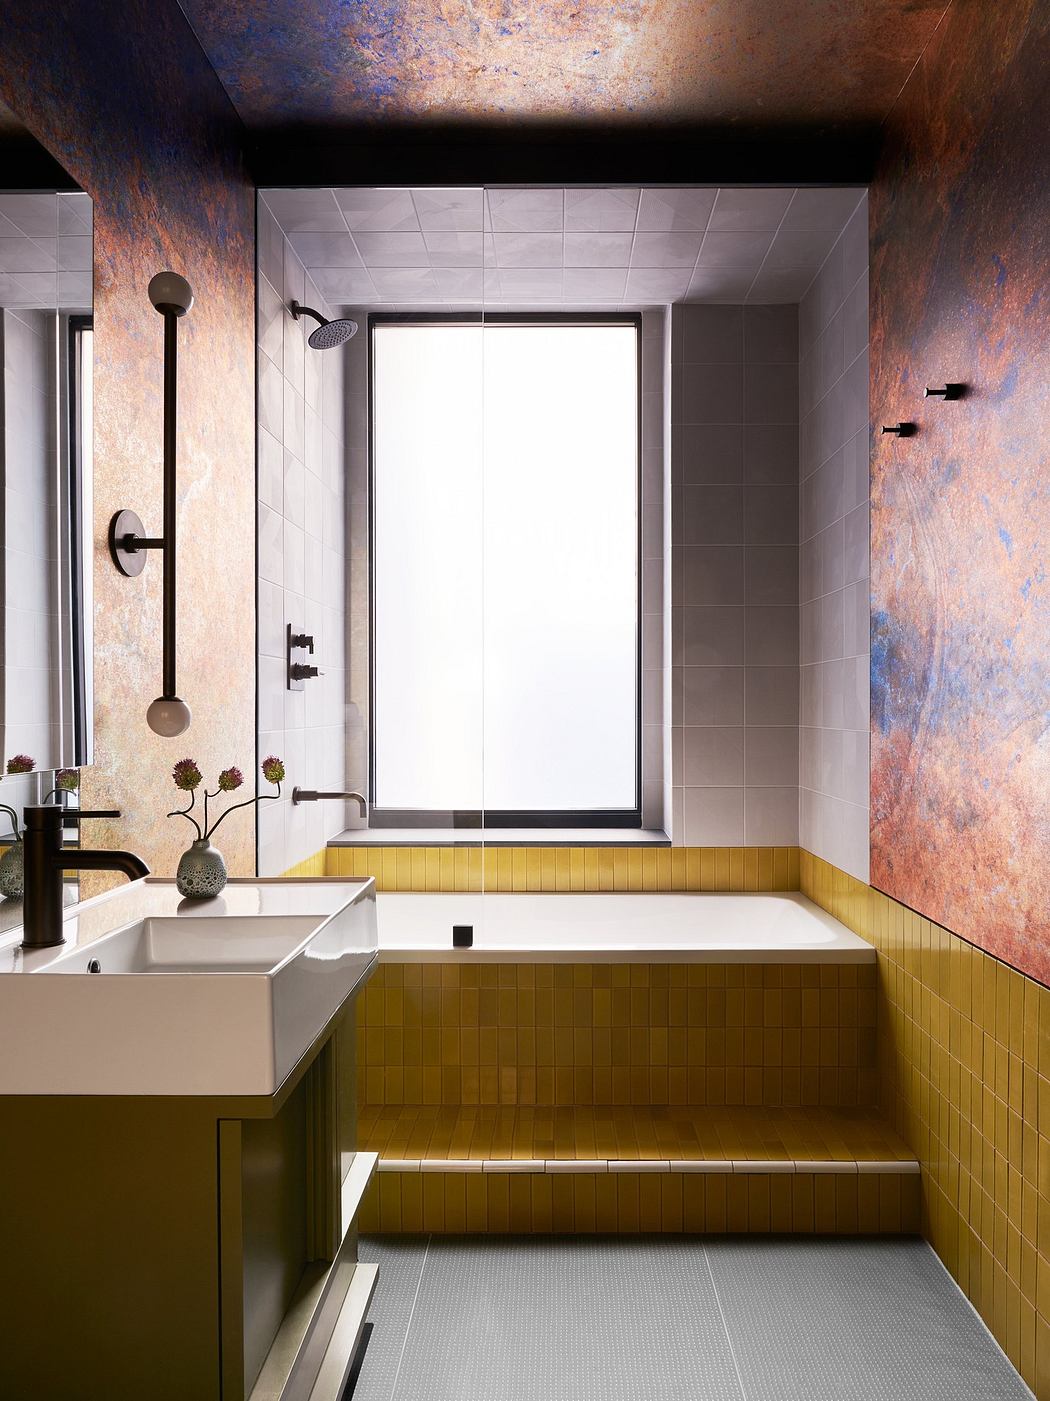 Contemporary bathroom with cosmic ceiling and yellow tiles.